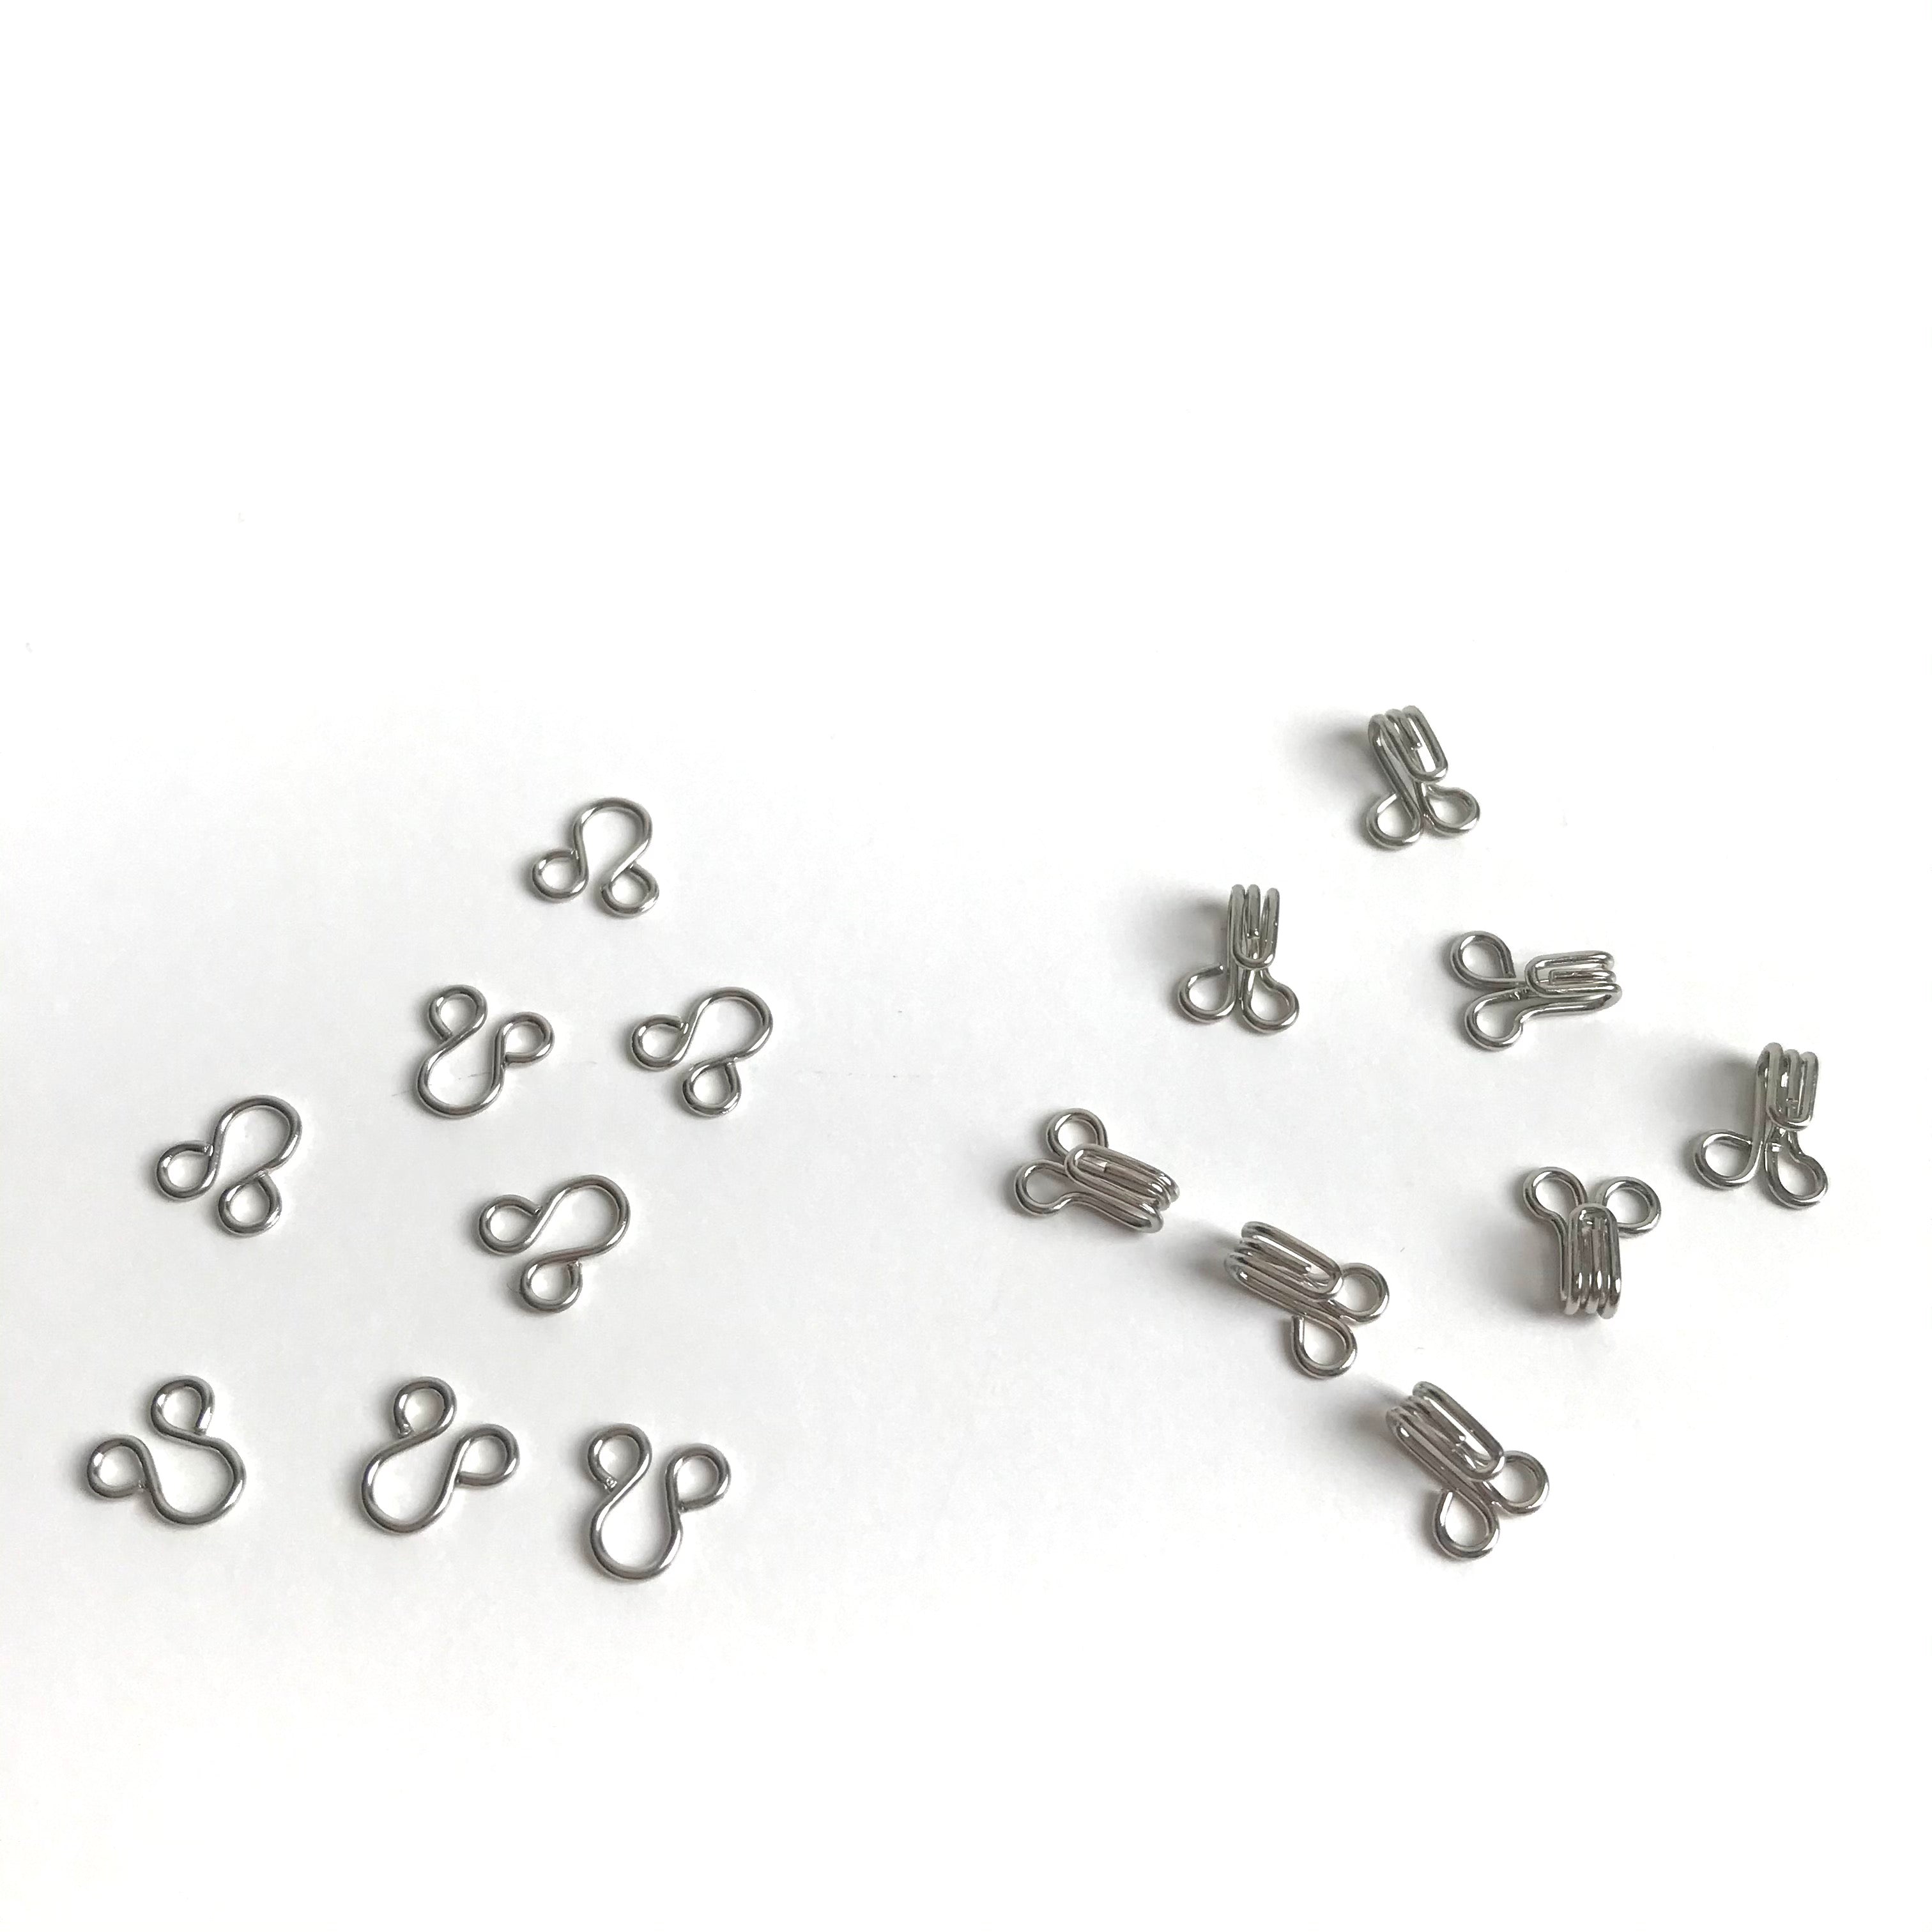 Bra Hooks and Eyes Clothing Sewing 8mm 10mm Pack of 36 Sets Silver, bra  hook and eye